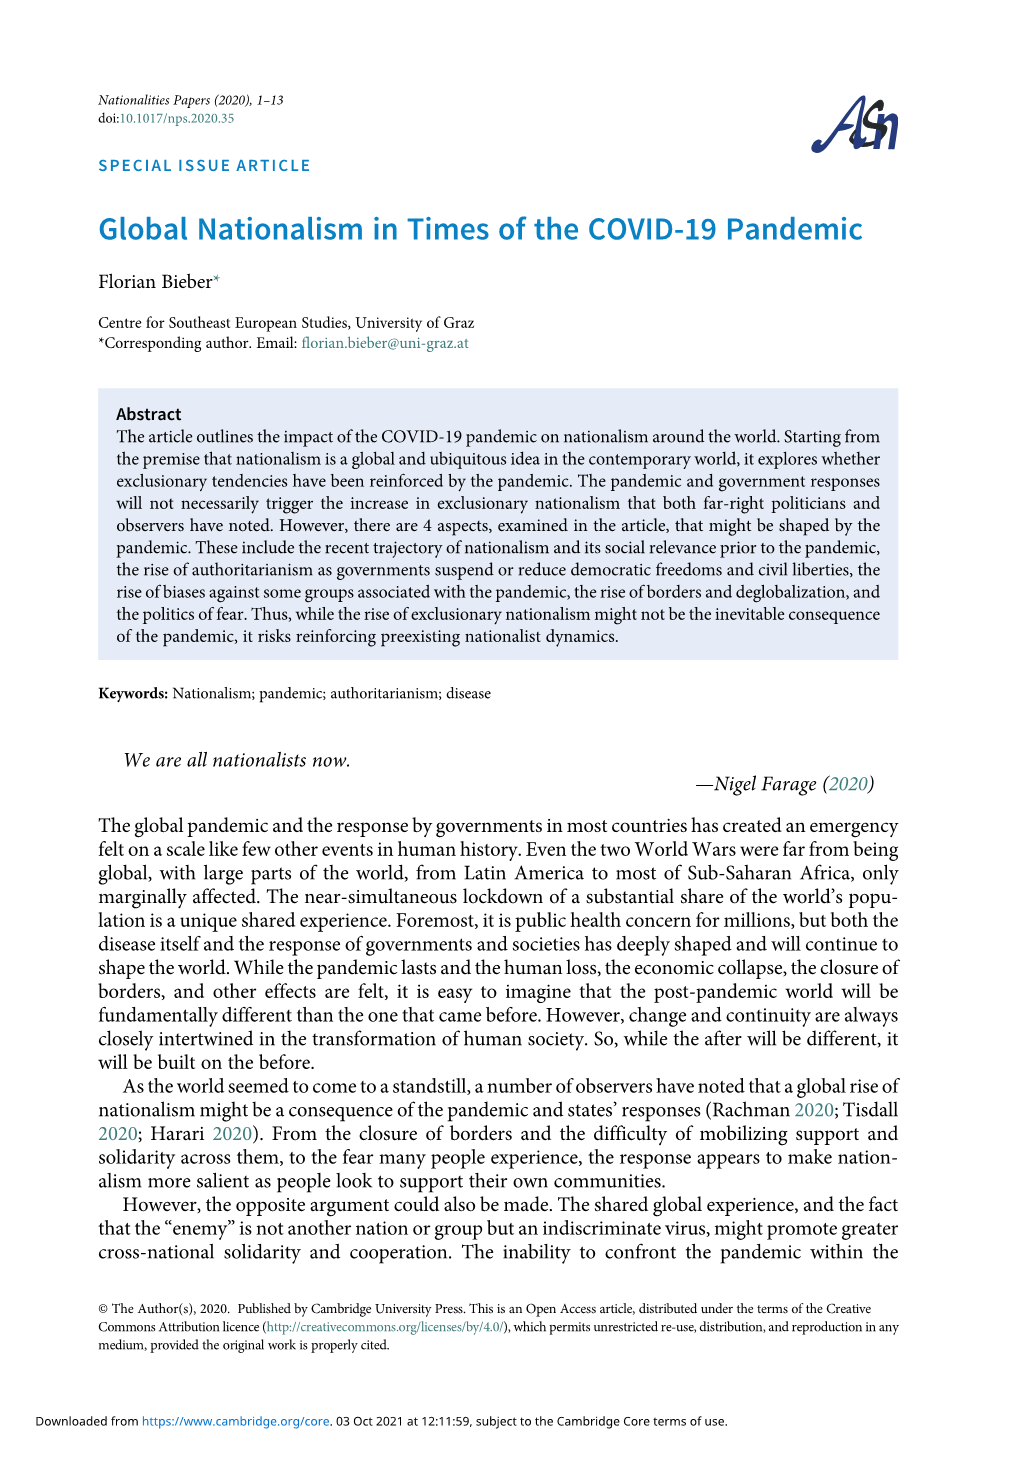 Global Nationalism in Times of the COVID-19 Pandemic